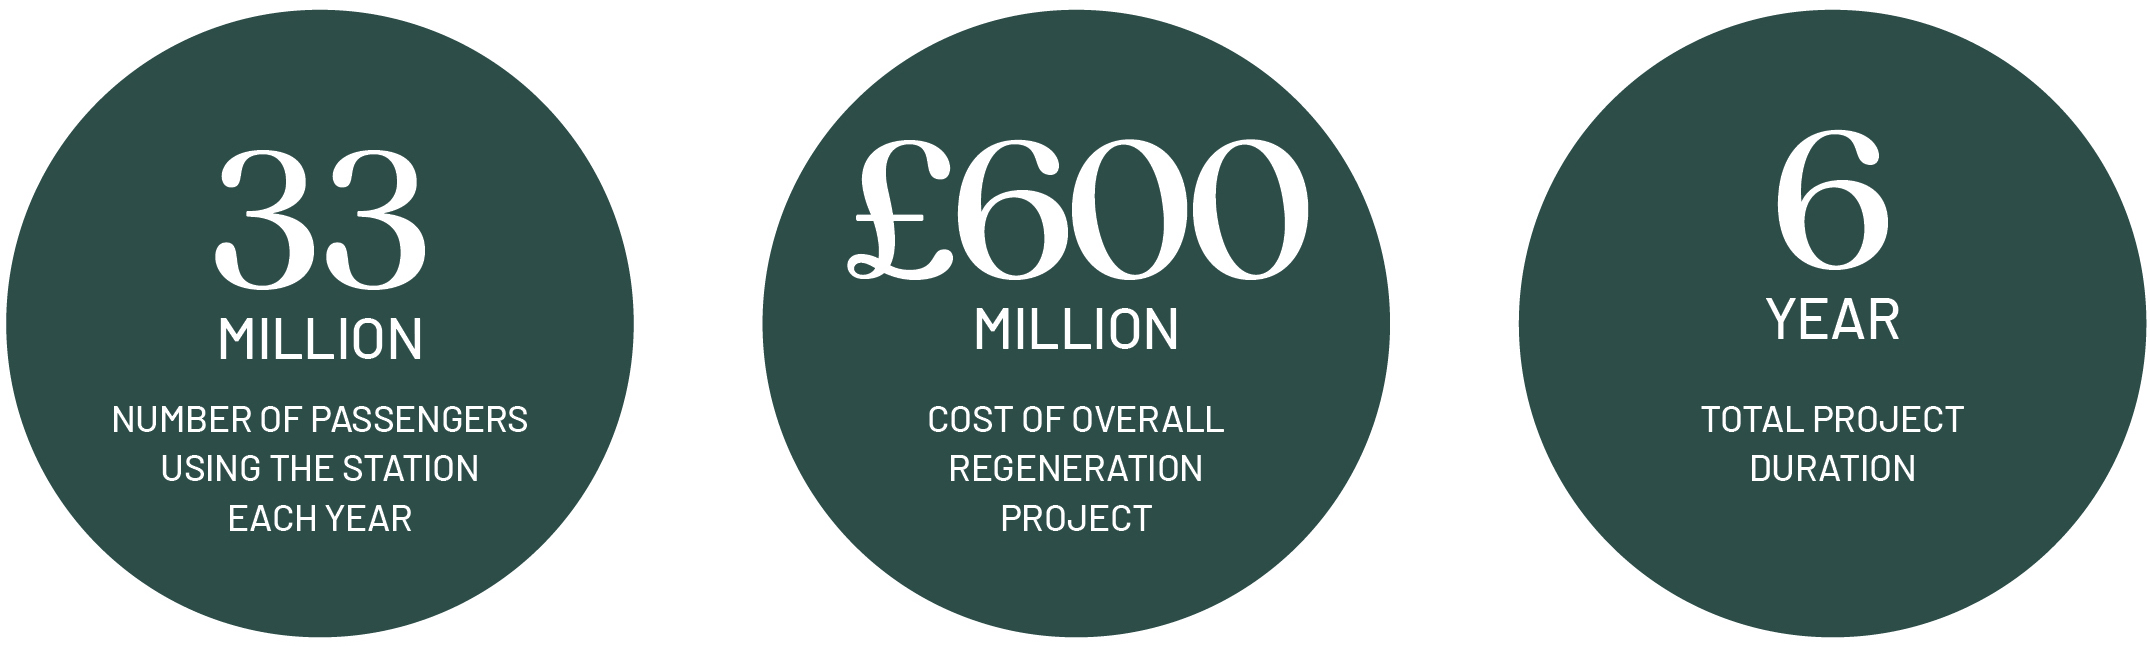 Project highlights graphic for New Street station structural alterations. 33 million passengers using the station each year, £600 million overall generation project, 6 year total project duration.